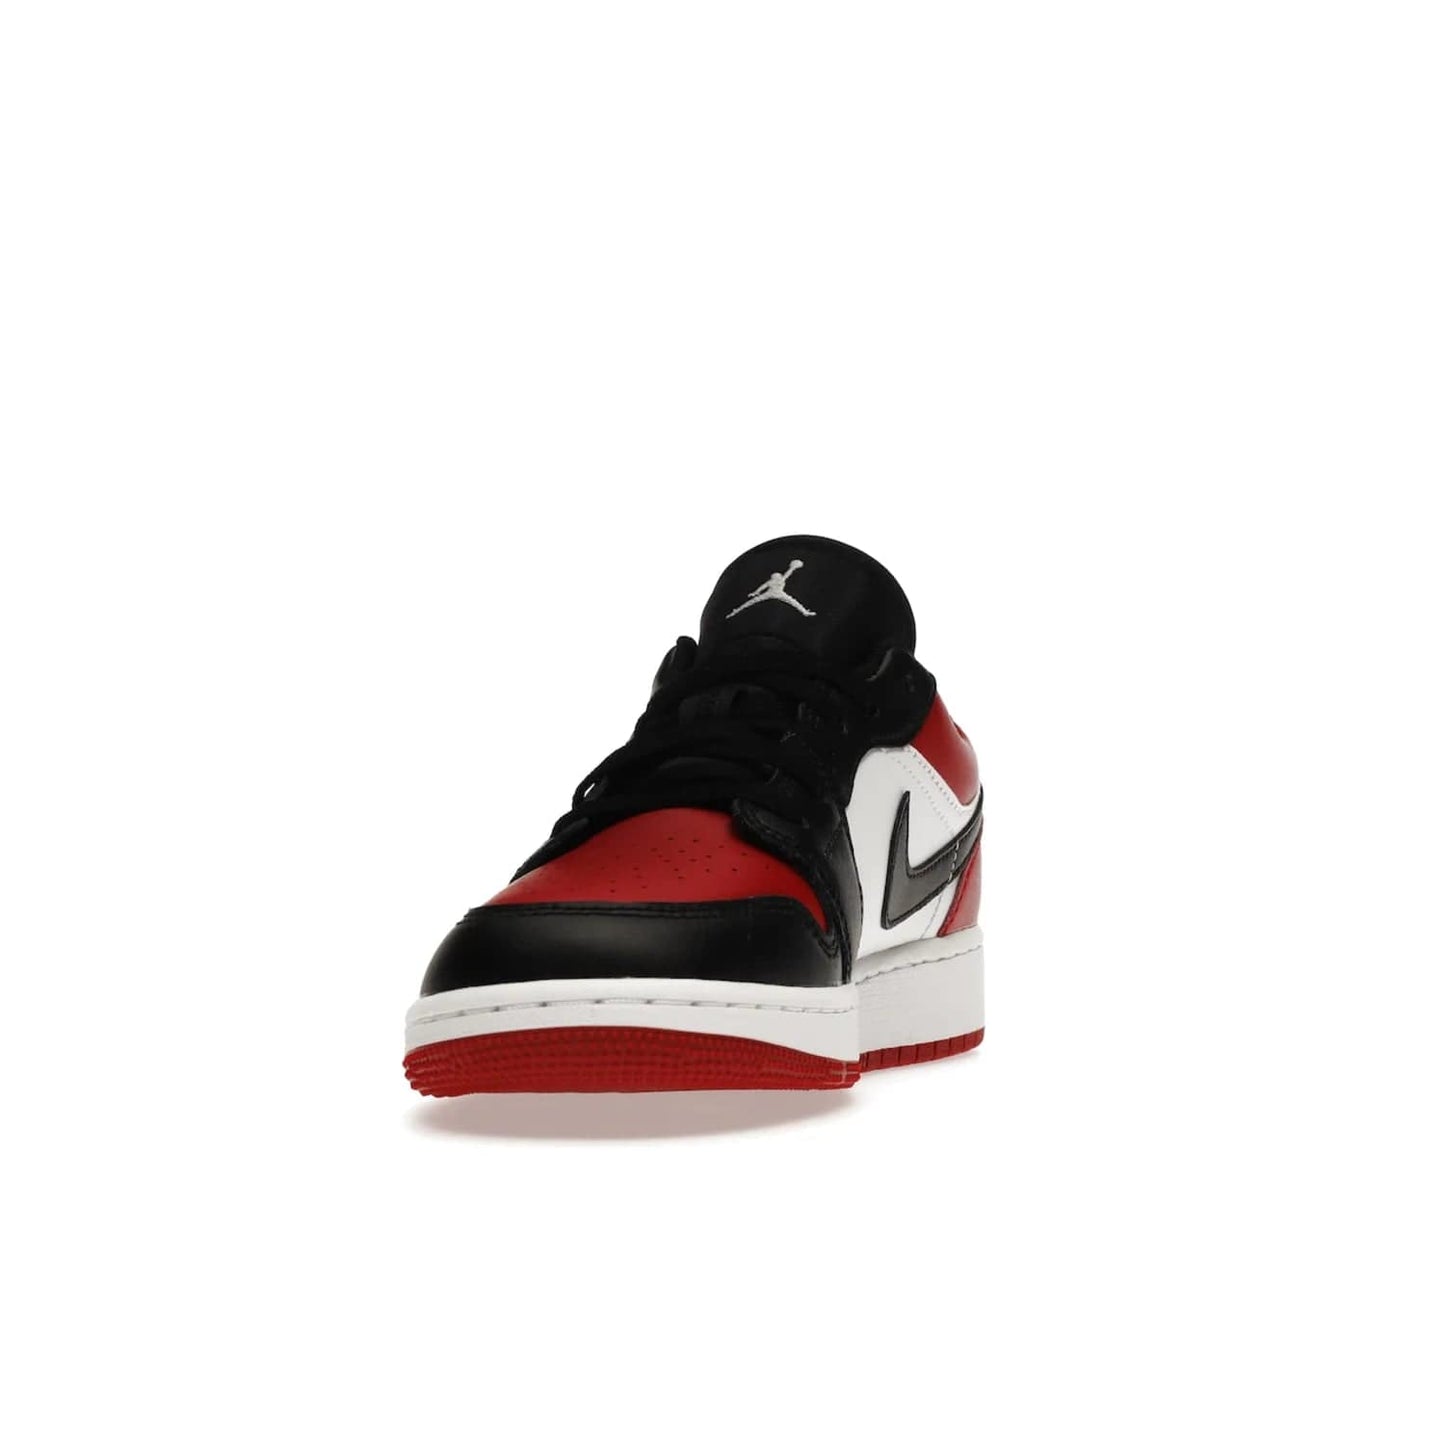 Jordan 1 Low Bred Toe (GS) - Image 12 - Only at www.BallersClubKickz.com - #
Iconic sneaker from Jordan brand with classic colorway, unique detailing & Air Jordan Wings logo. Step into the shoes of the greats with the Jordan 1 Low Bred Toe GS!